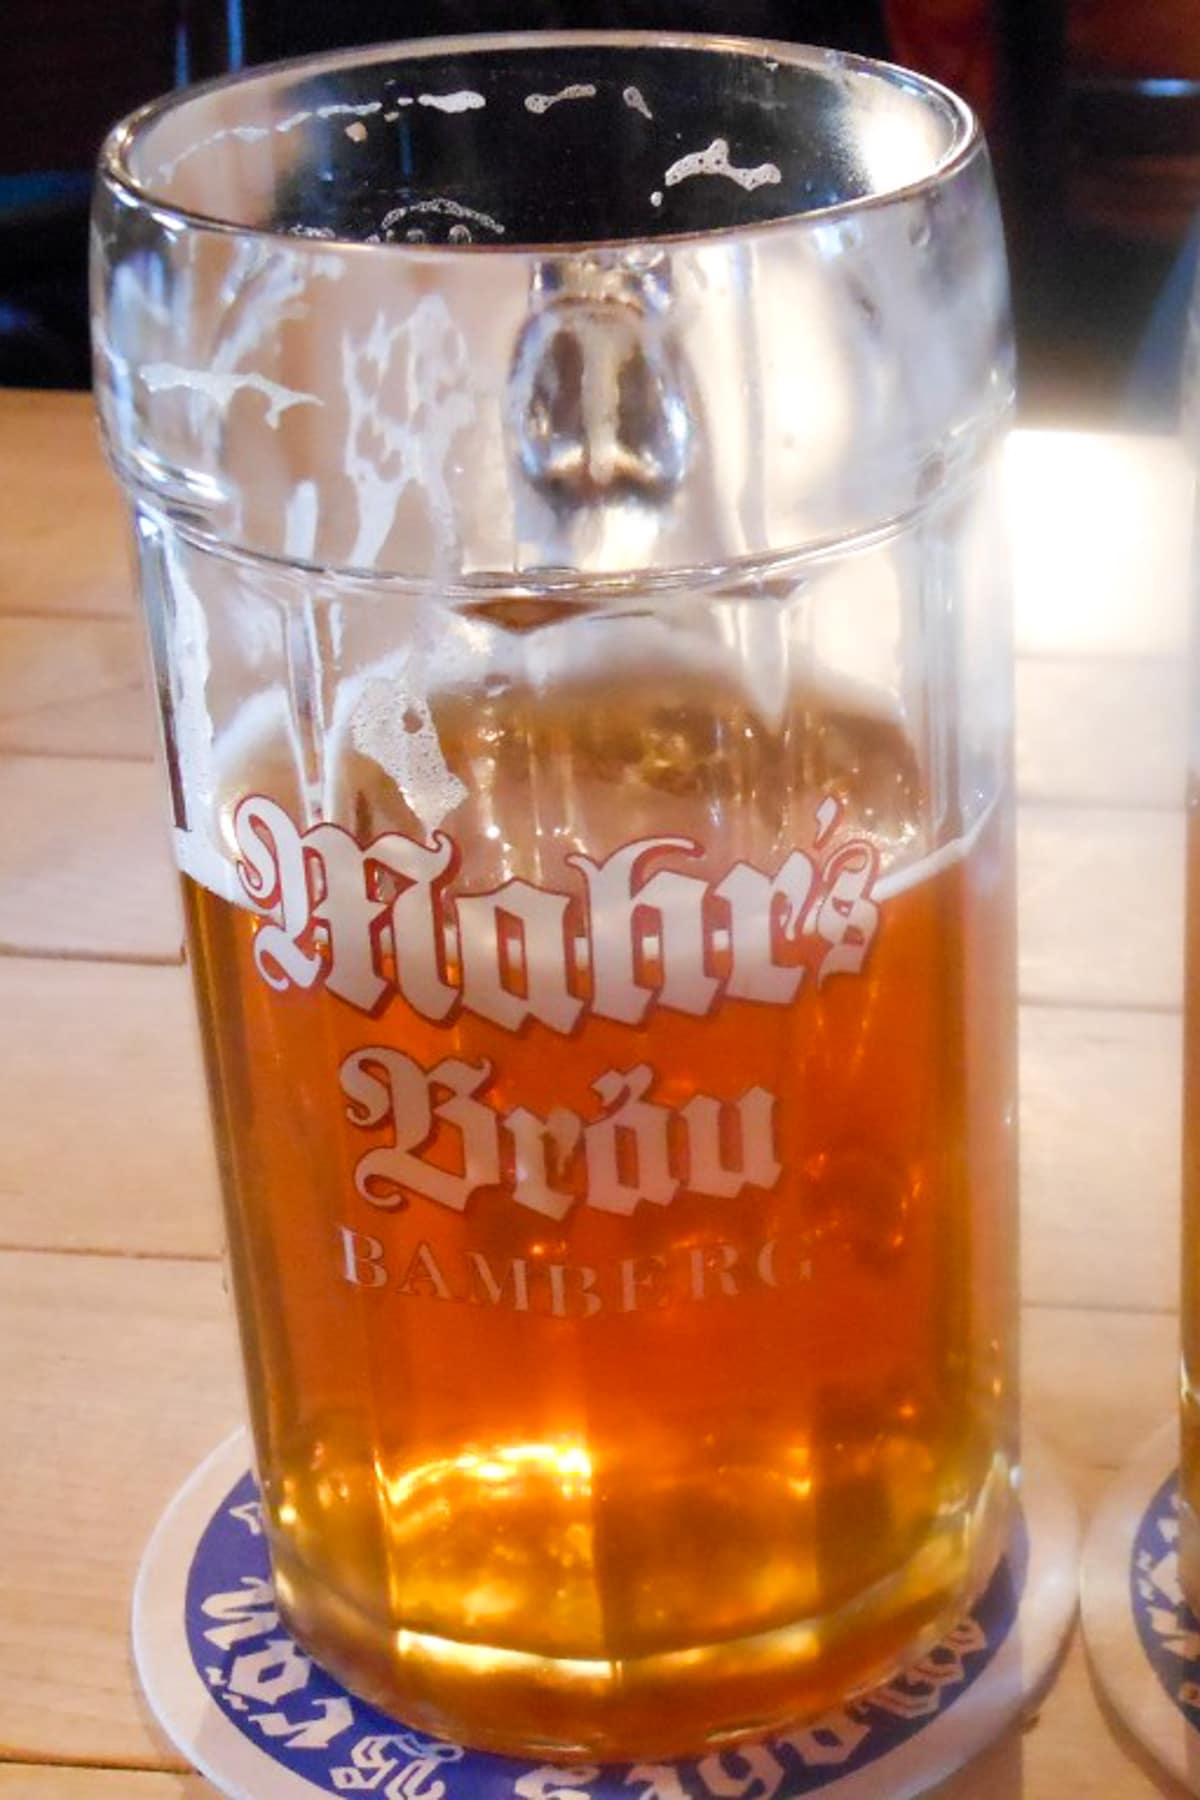 Enjoy a beer filled adventure in Bamberg, Germany with this self-guided Bamberg Beer Tour. Home of the original Rauchbier!